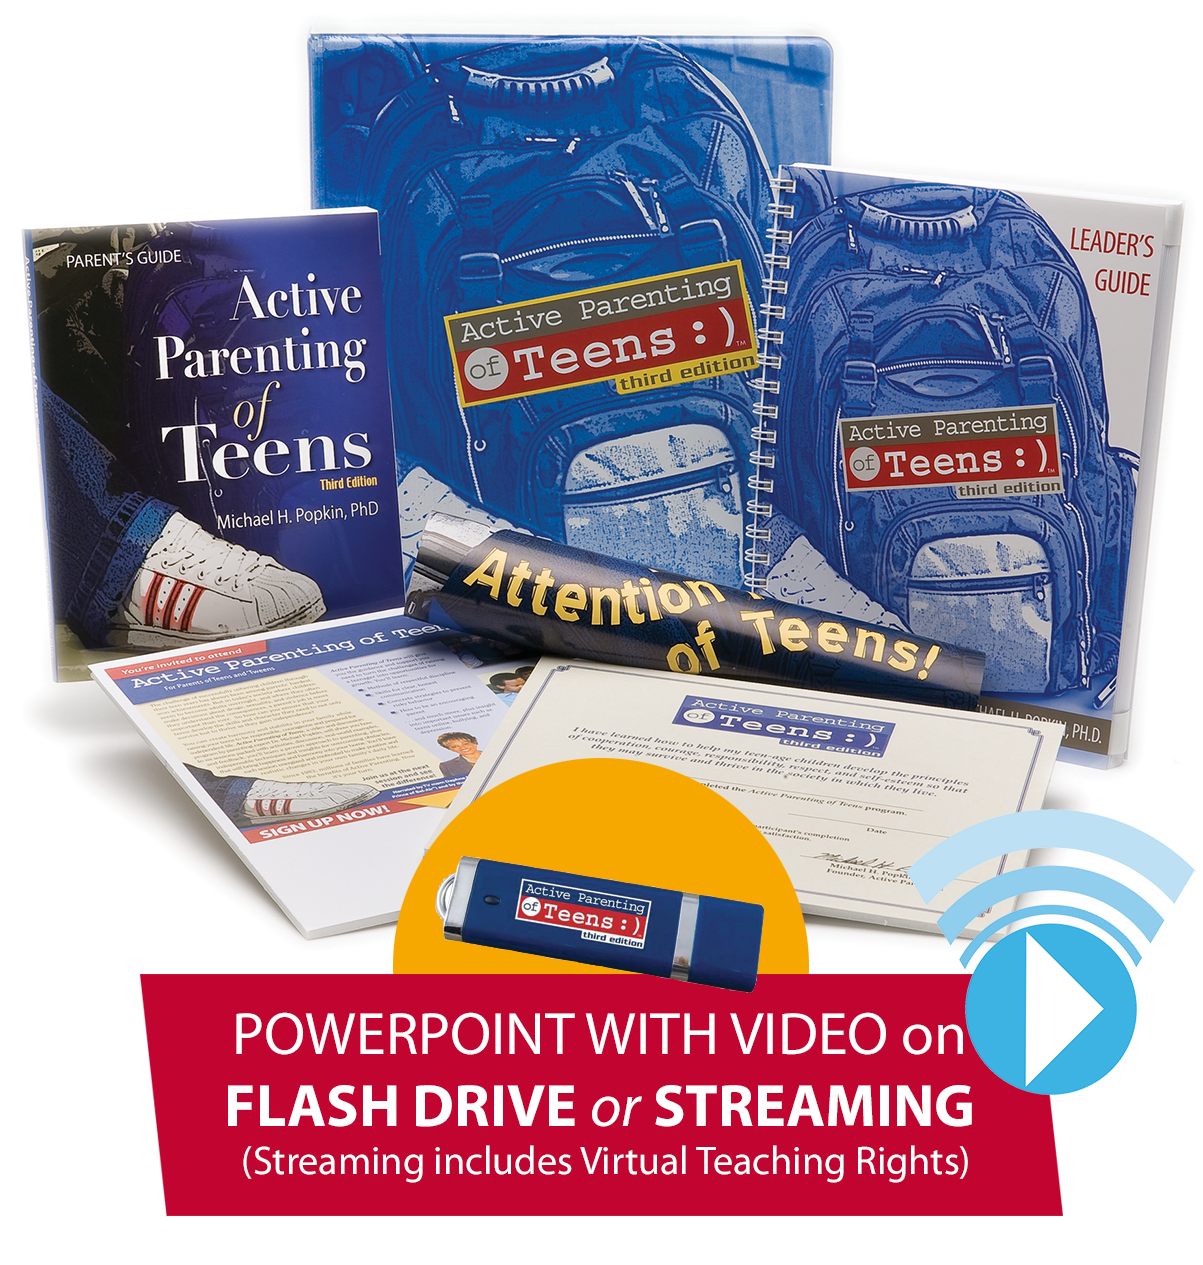 Active Parenting of Teens on Flash Drive or Streaming